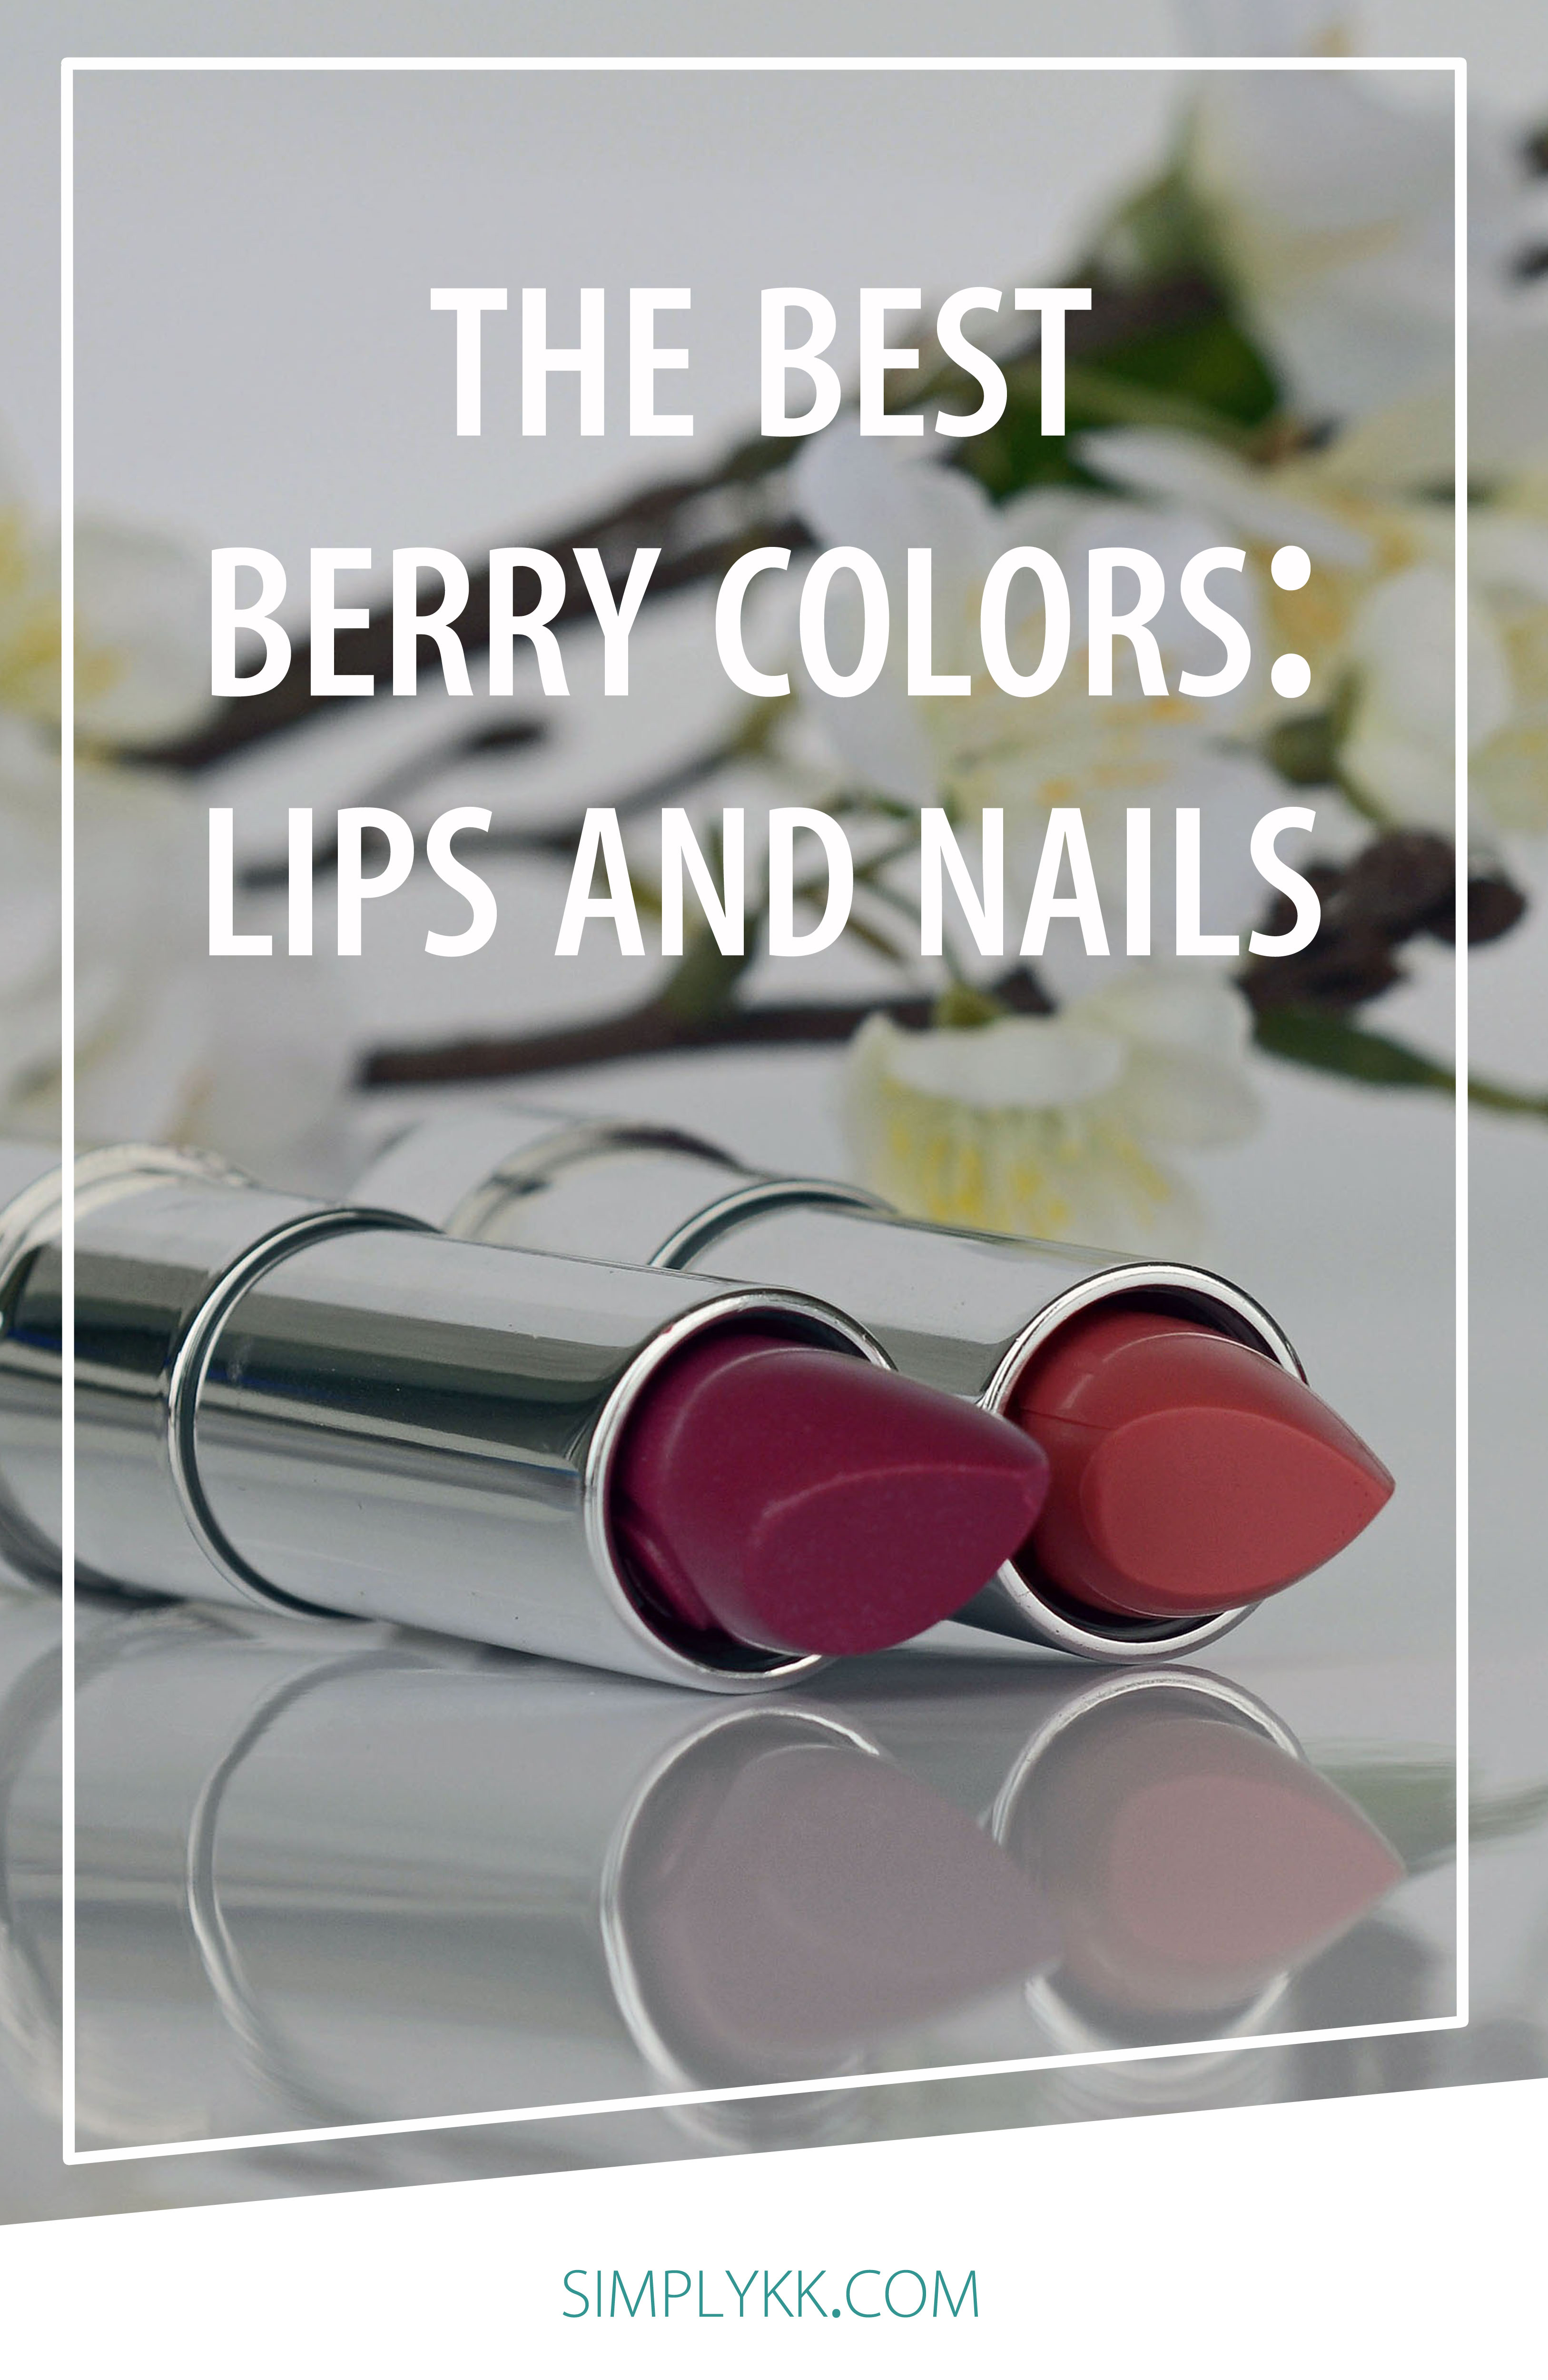 The best berry colors for lips and nails | Simply KK